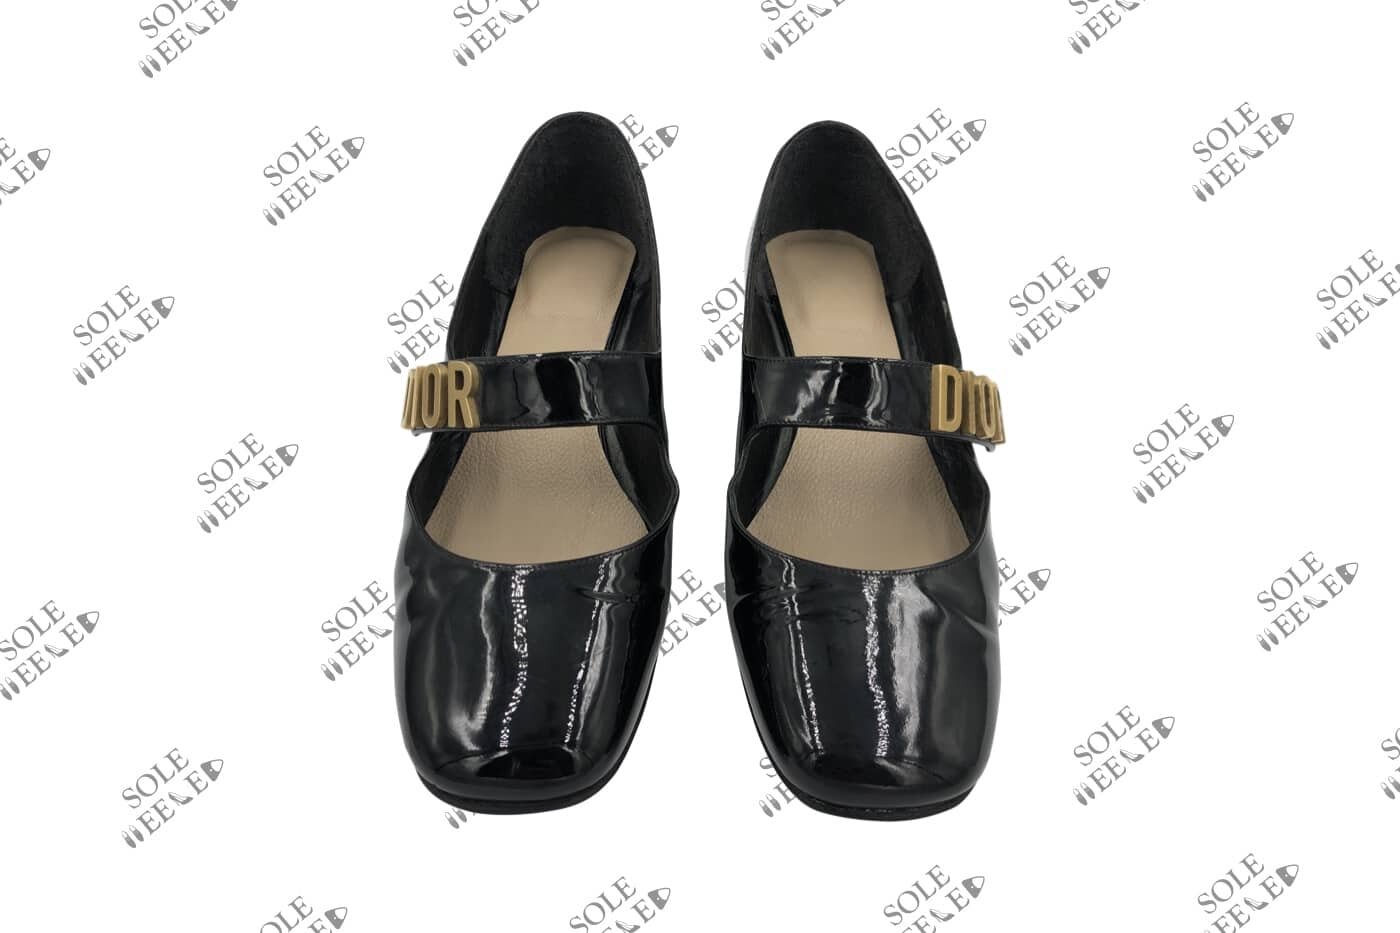 Dior Mary Jane  For Sale on 1stDibs  dior mary jane shoes dior mary janes  mary jane dior